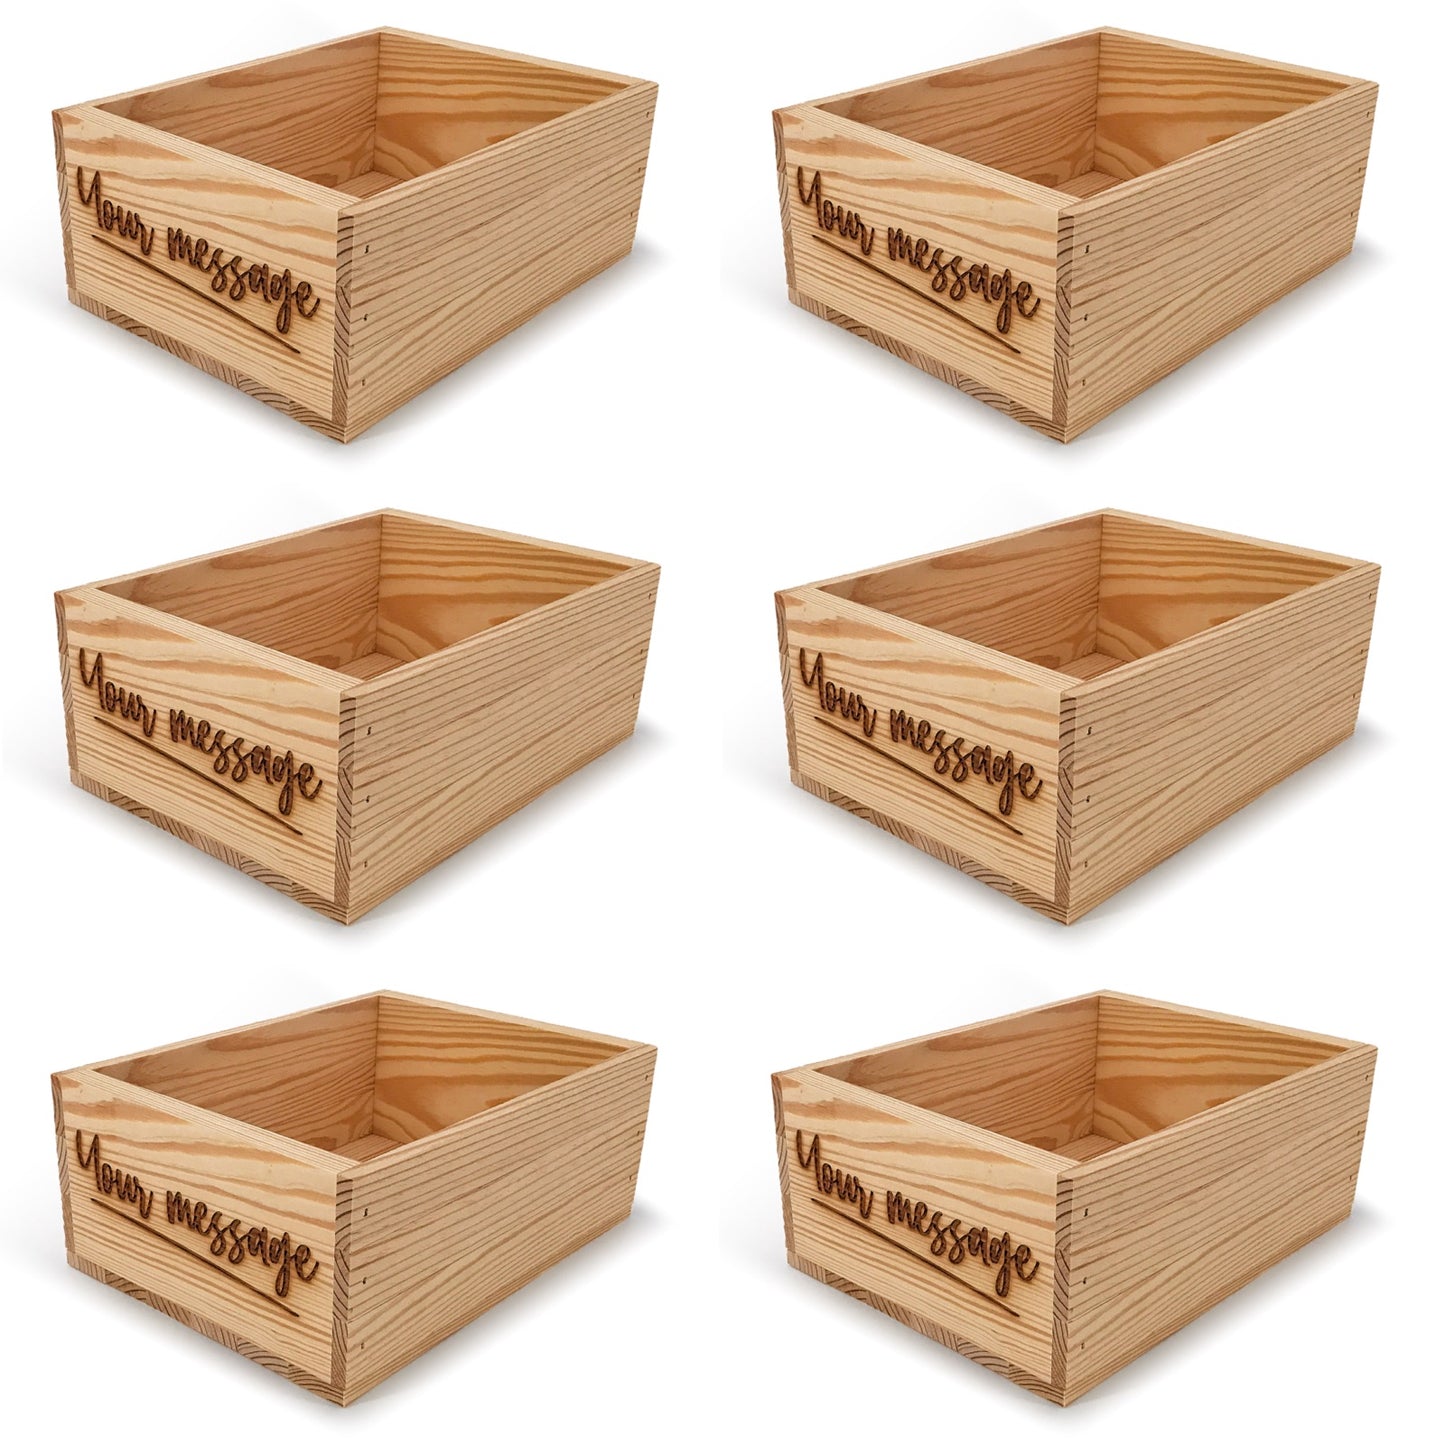 6 Small wooden crates with custom message 10x8x4.25